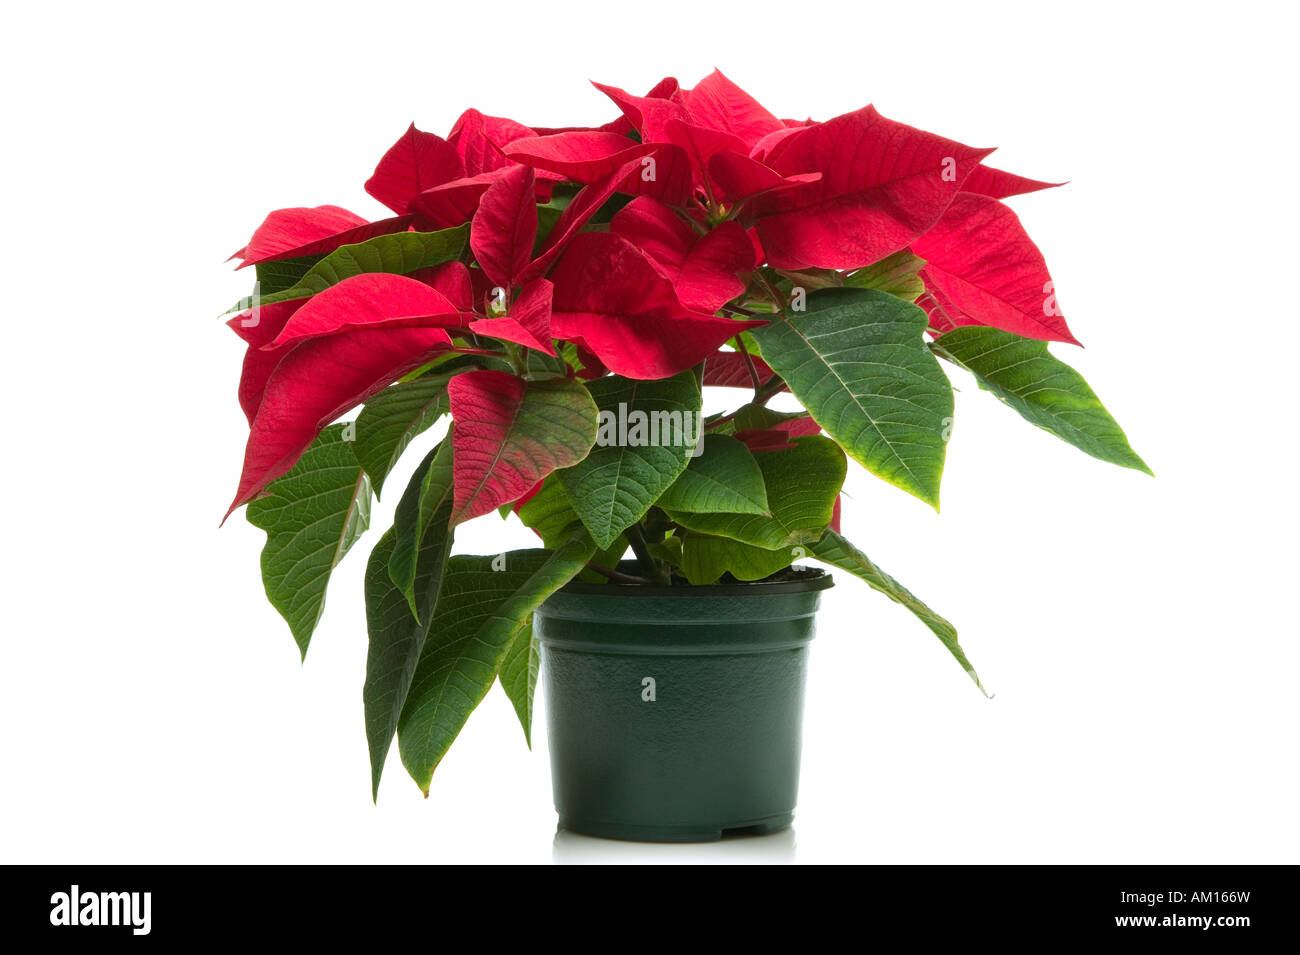 Poinsettia a k a Christmas flower isolated on a white background Stock Photo